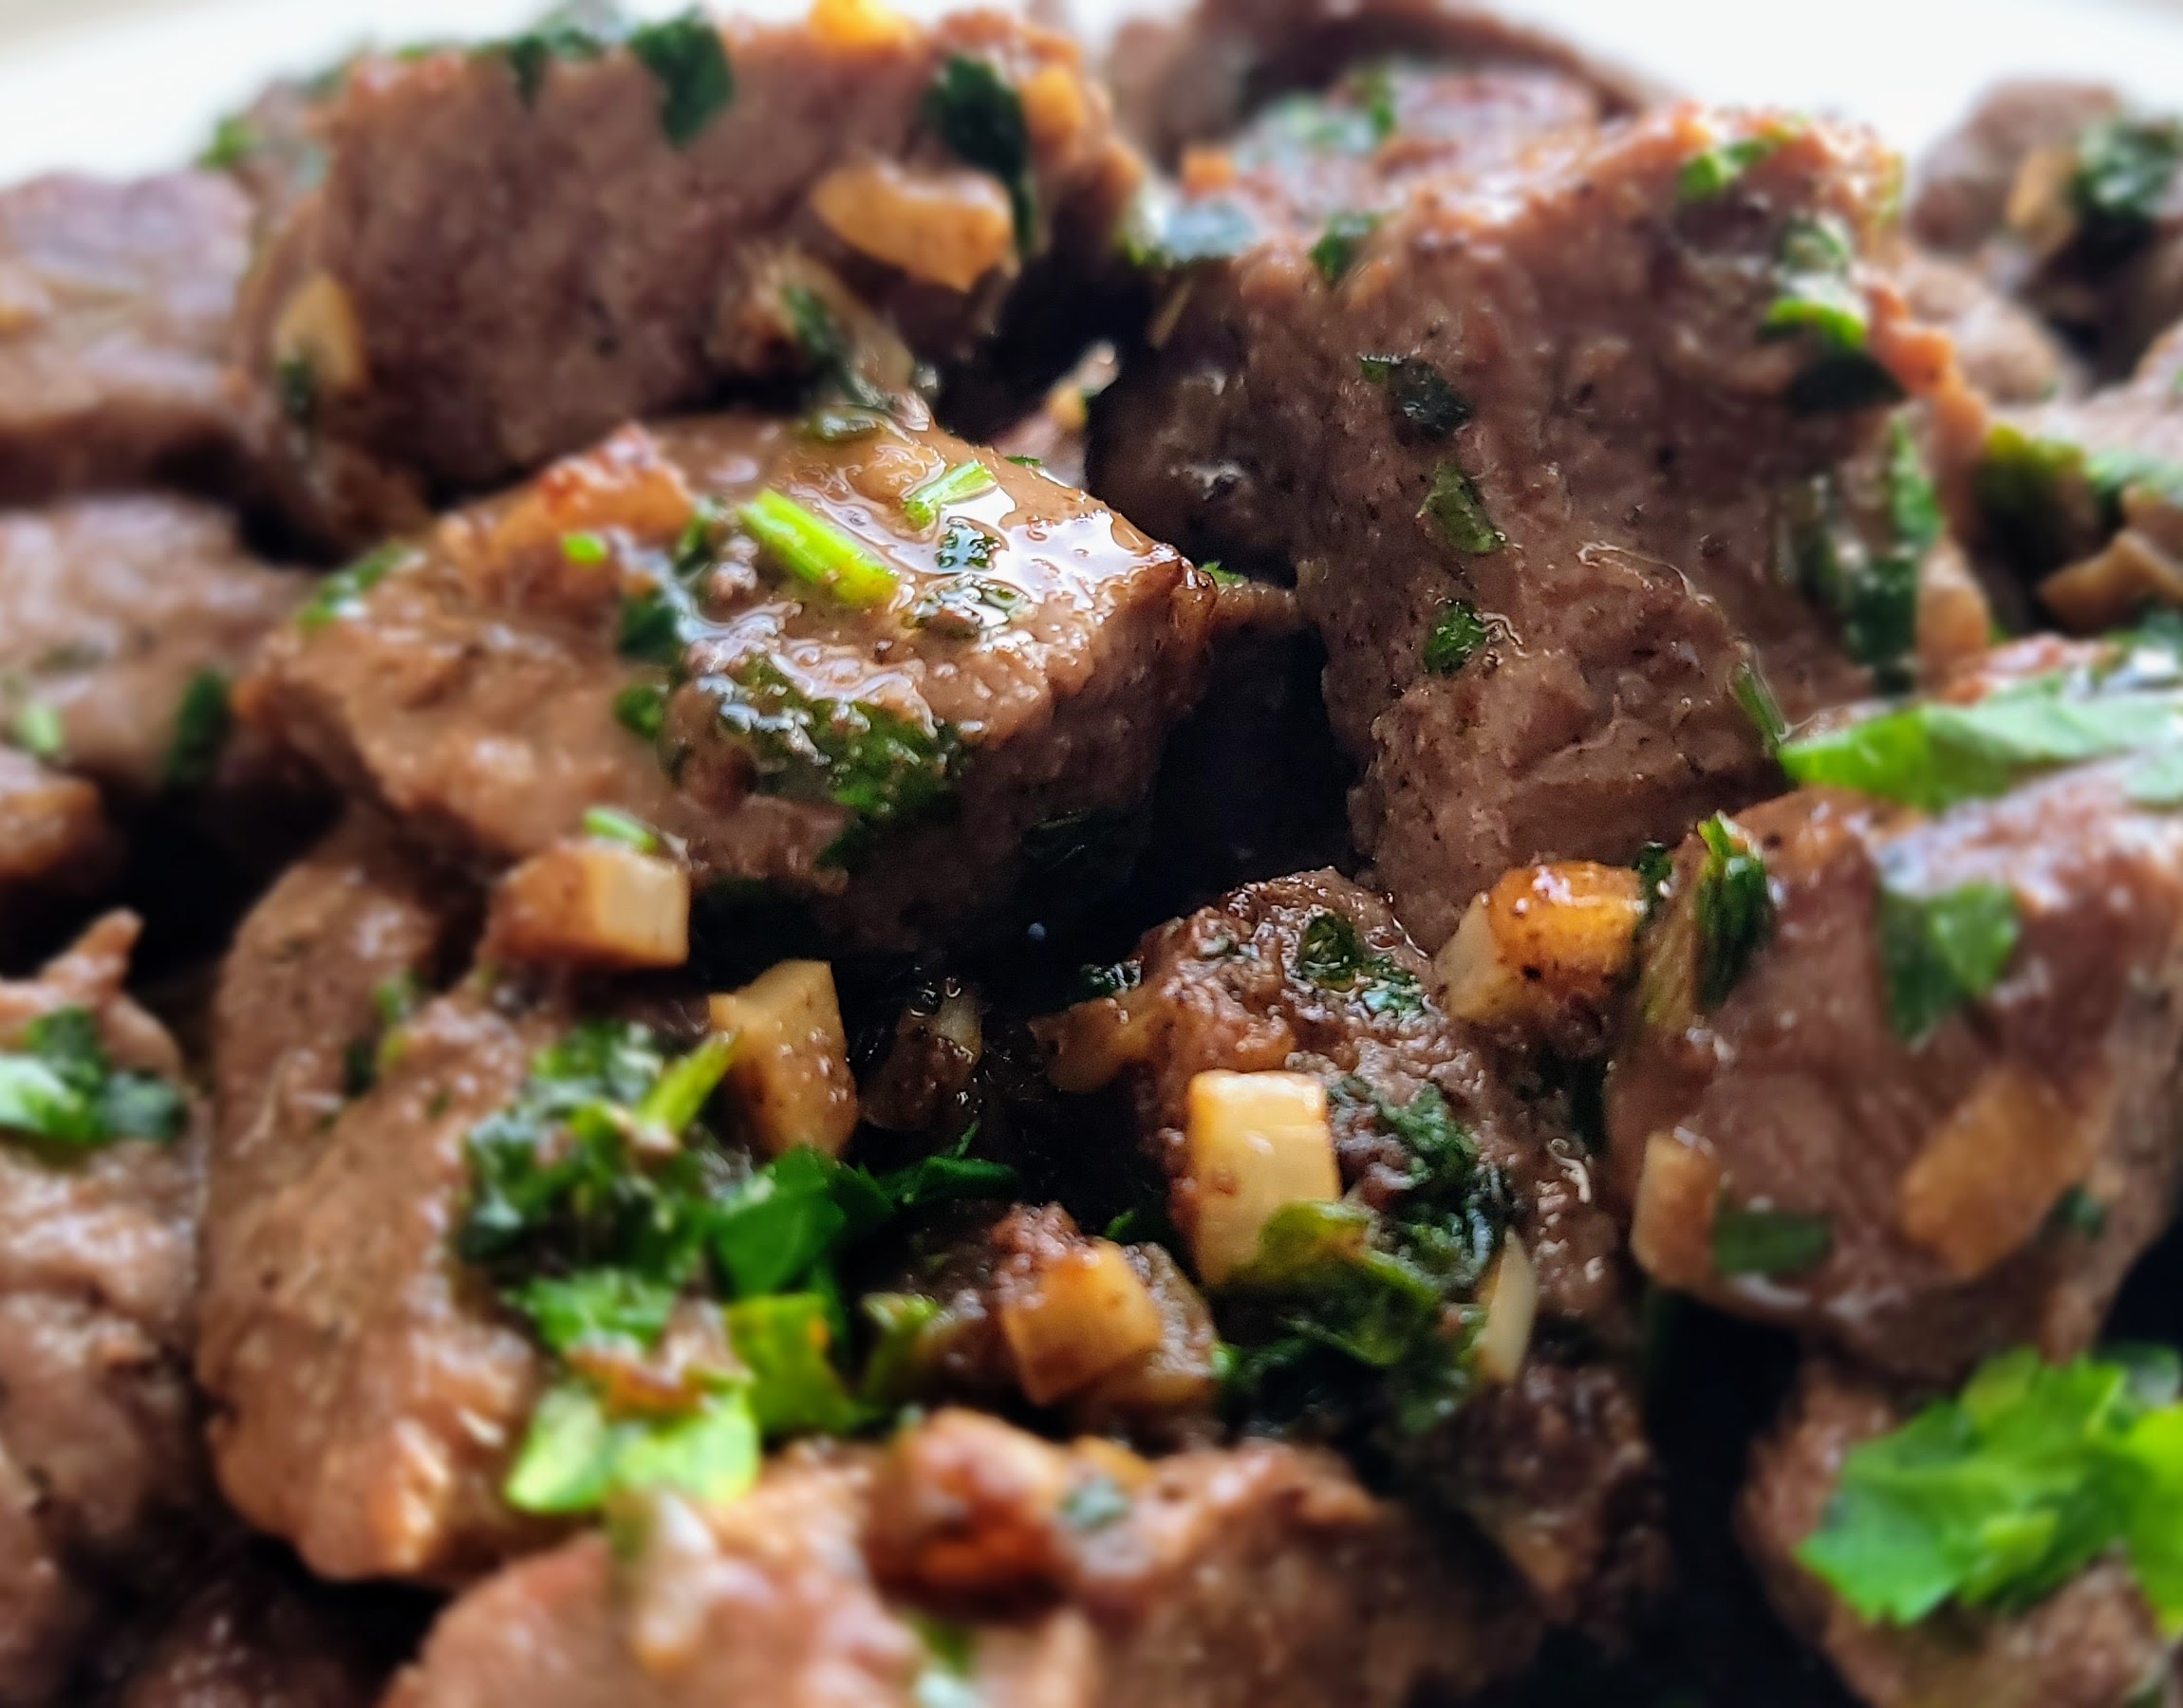 cooked steak bites with garlic, butter and parsley.